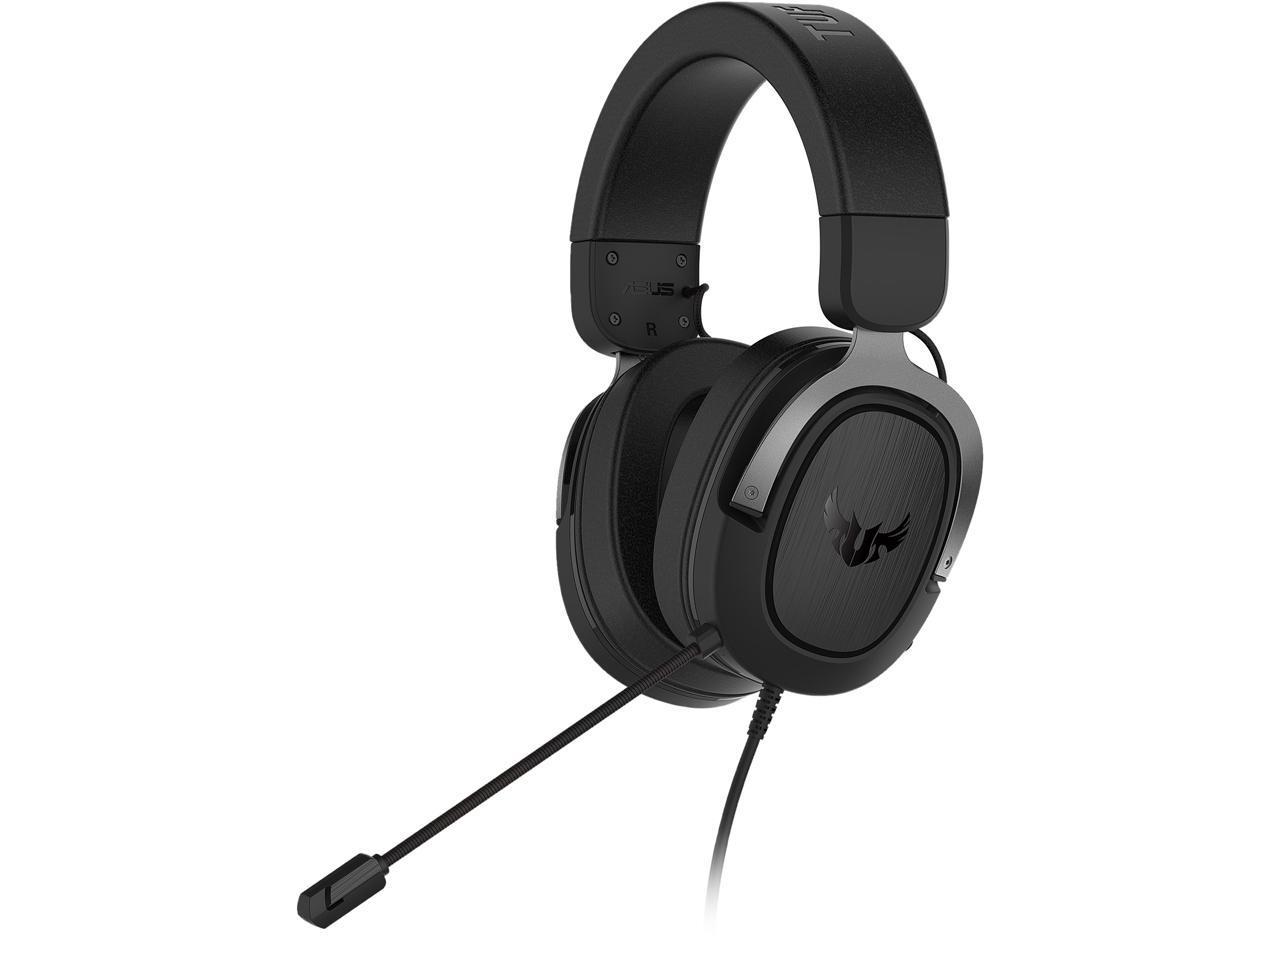 TUF GAMING H3 STEREO HEADSET